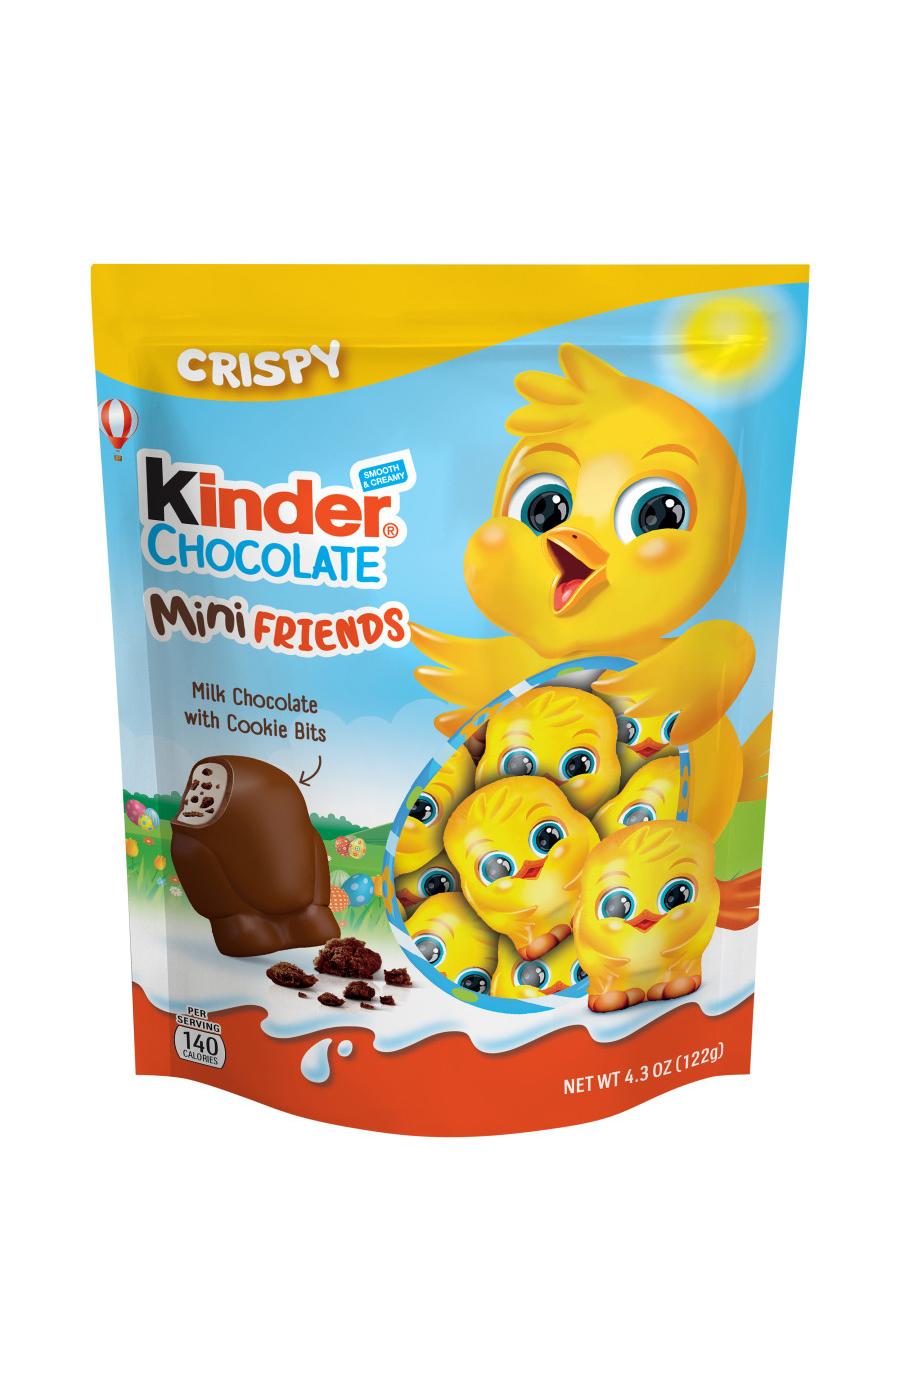 Kinder Crispy Chocolate Mini Friends Easter Candy; image 1 of 2